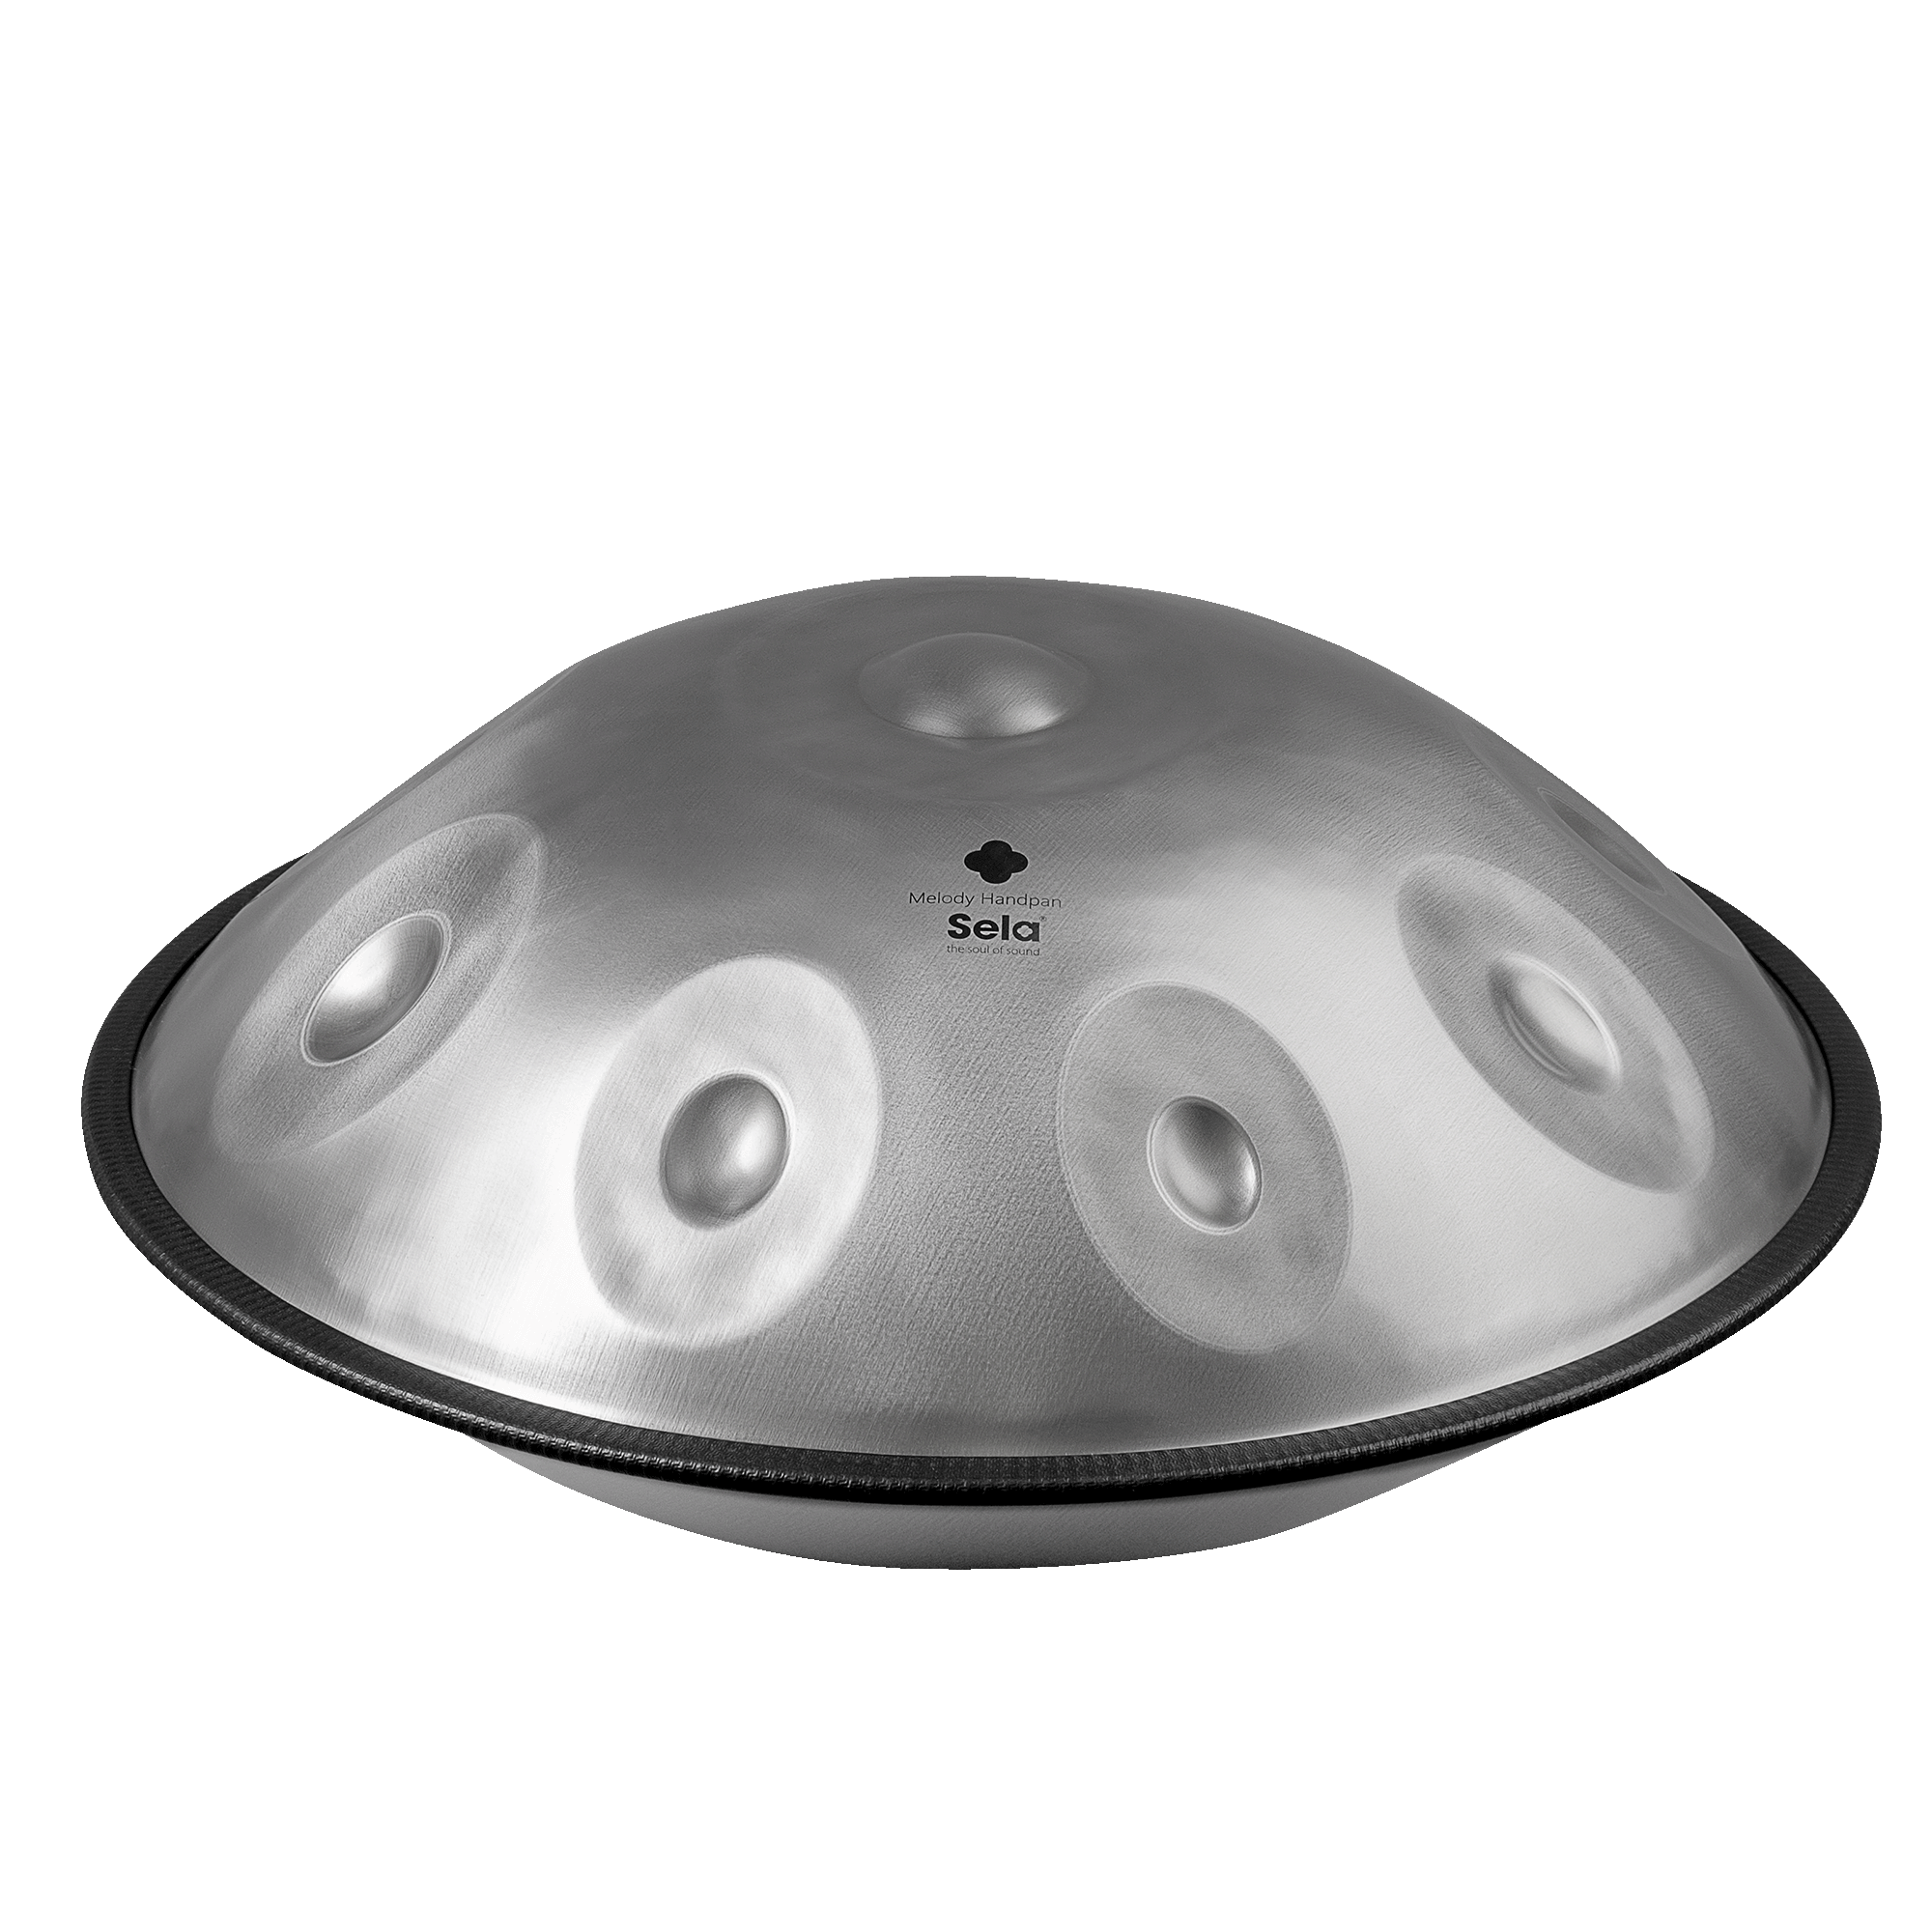 Melody Handpans Stainless Steel